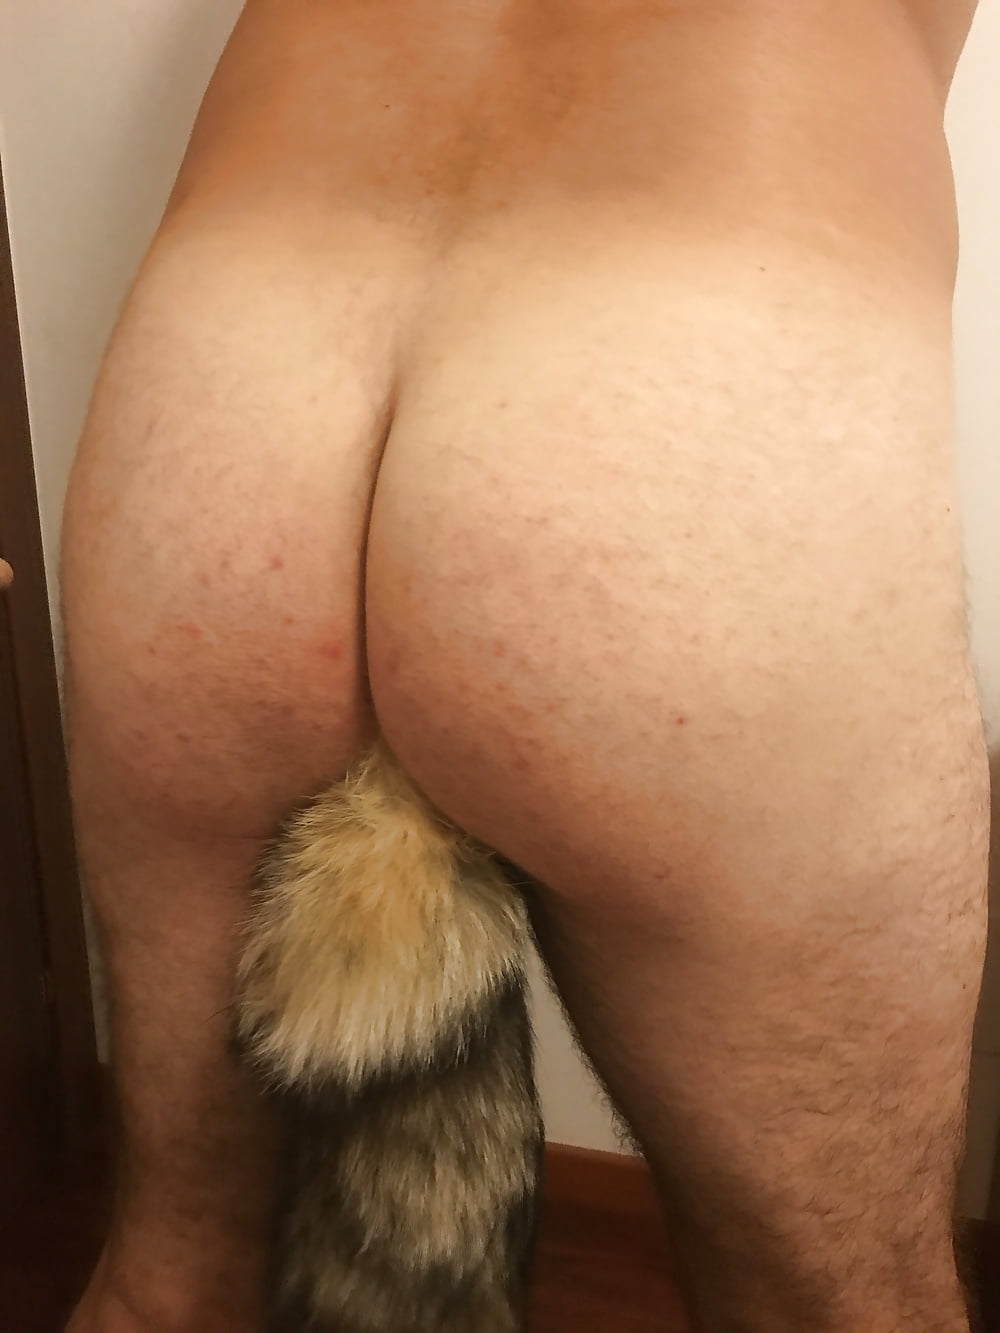 Male Ass With Foxtail Butt Plug 7 Pics Xhamster